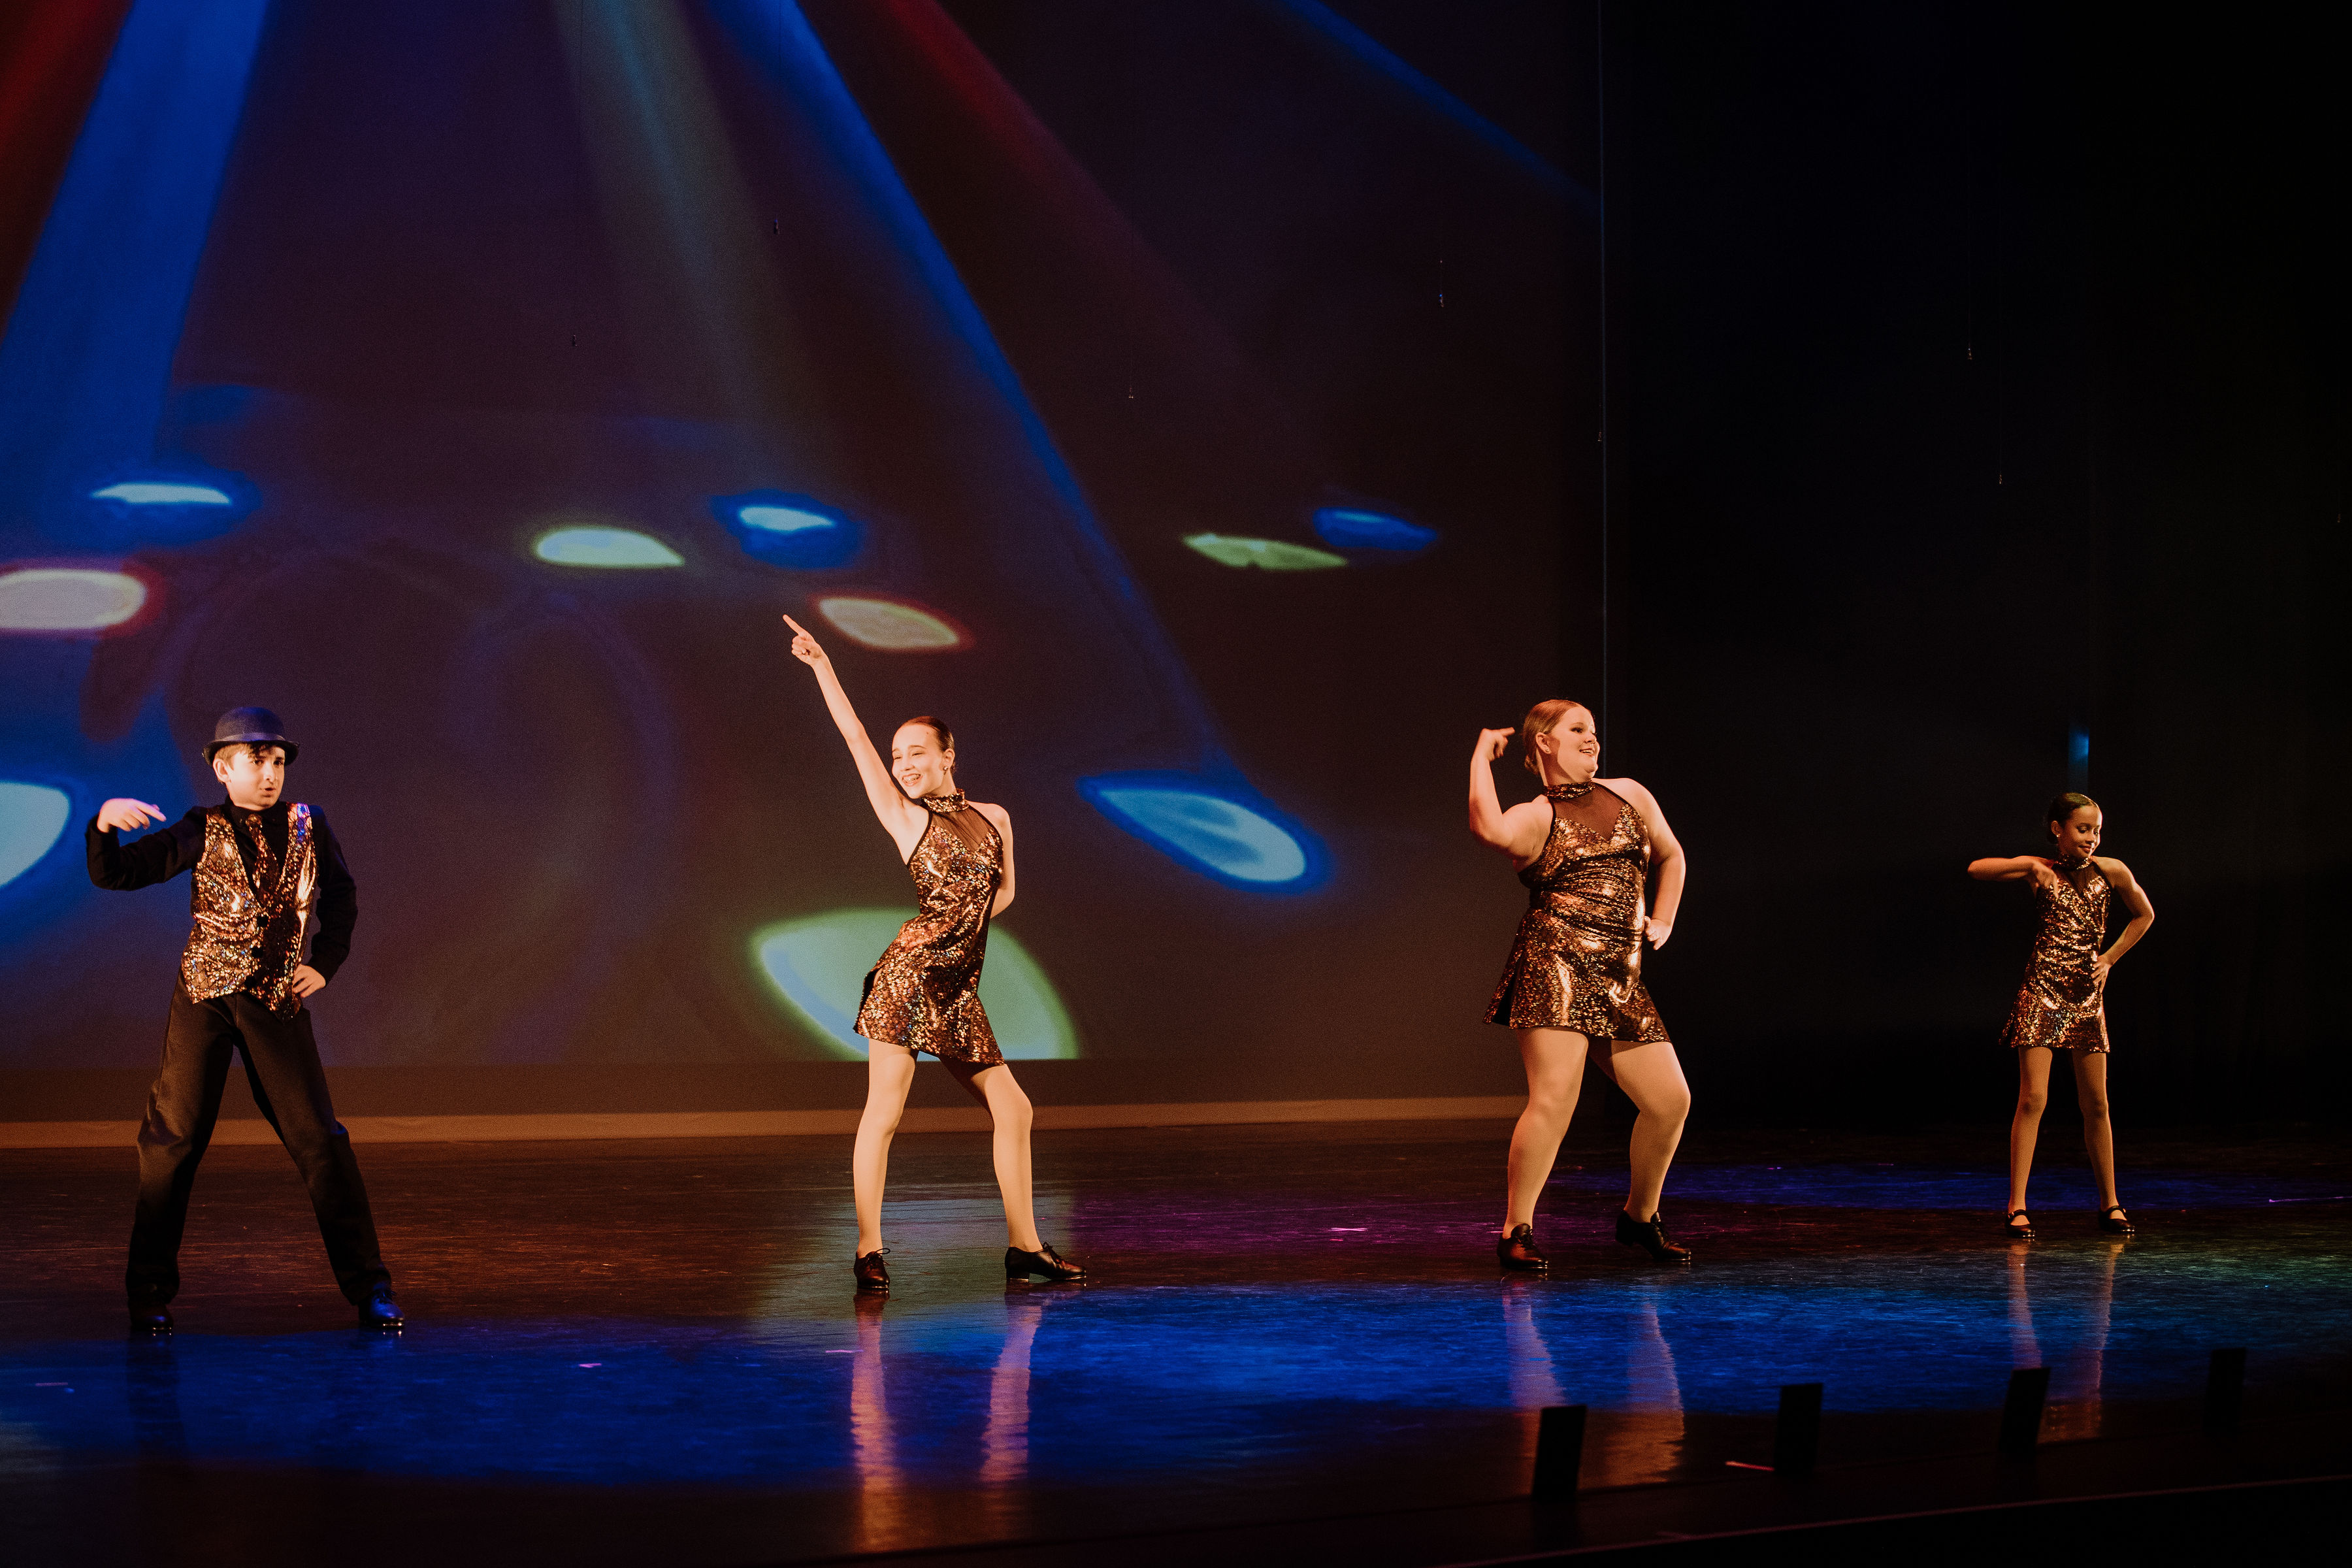 Four tap dancers doing a disco move during their on stage performance